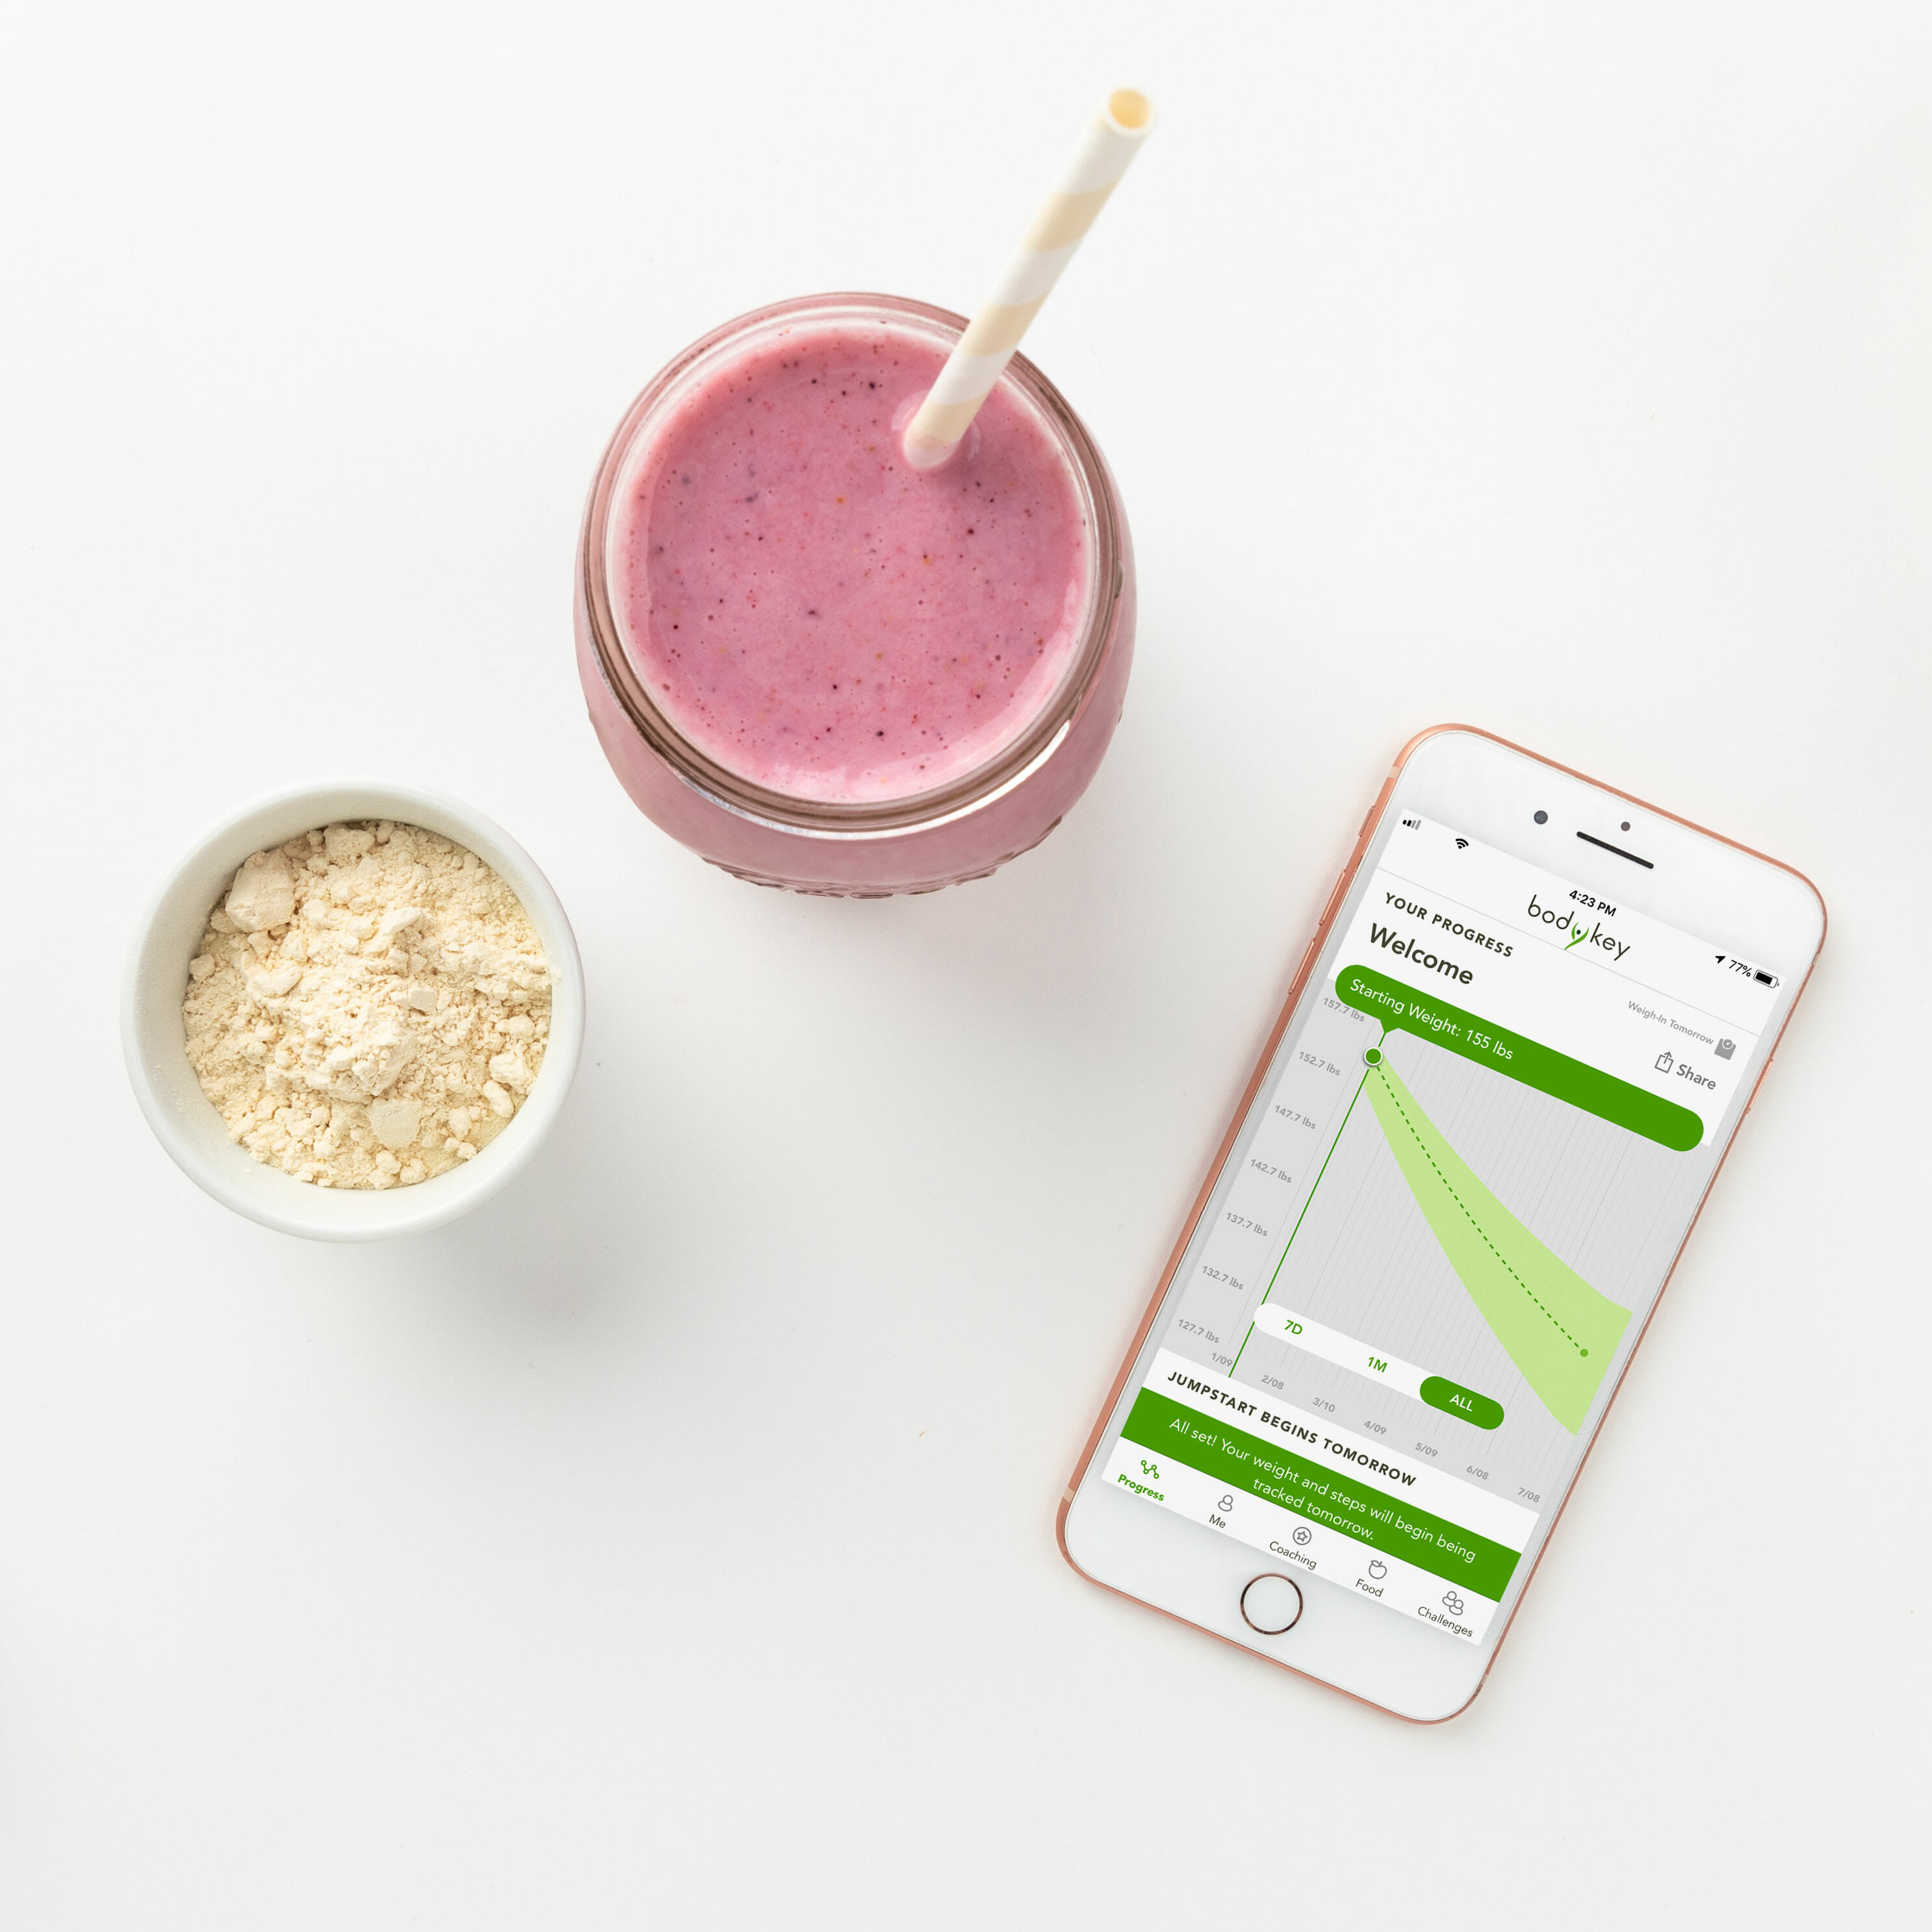 A strawberry BodyKey meal replacement shake in a glass with a straw is placed between a ramekin of the vanilla shake mix and a smartphone linked to the BodyKey Digital Coach. The Digital Coach allows you to stay connected, engaged and motivated on your terms.